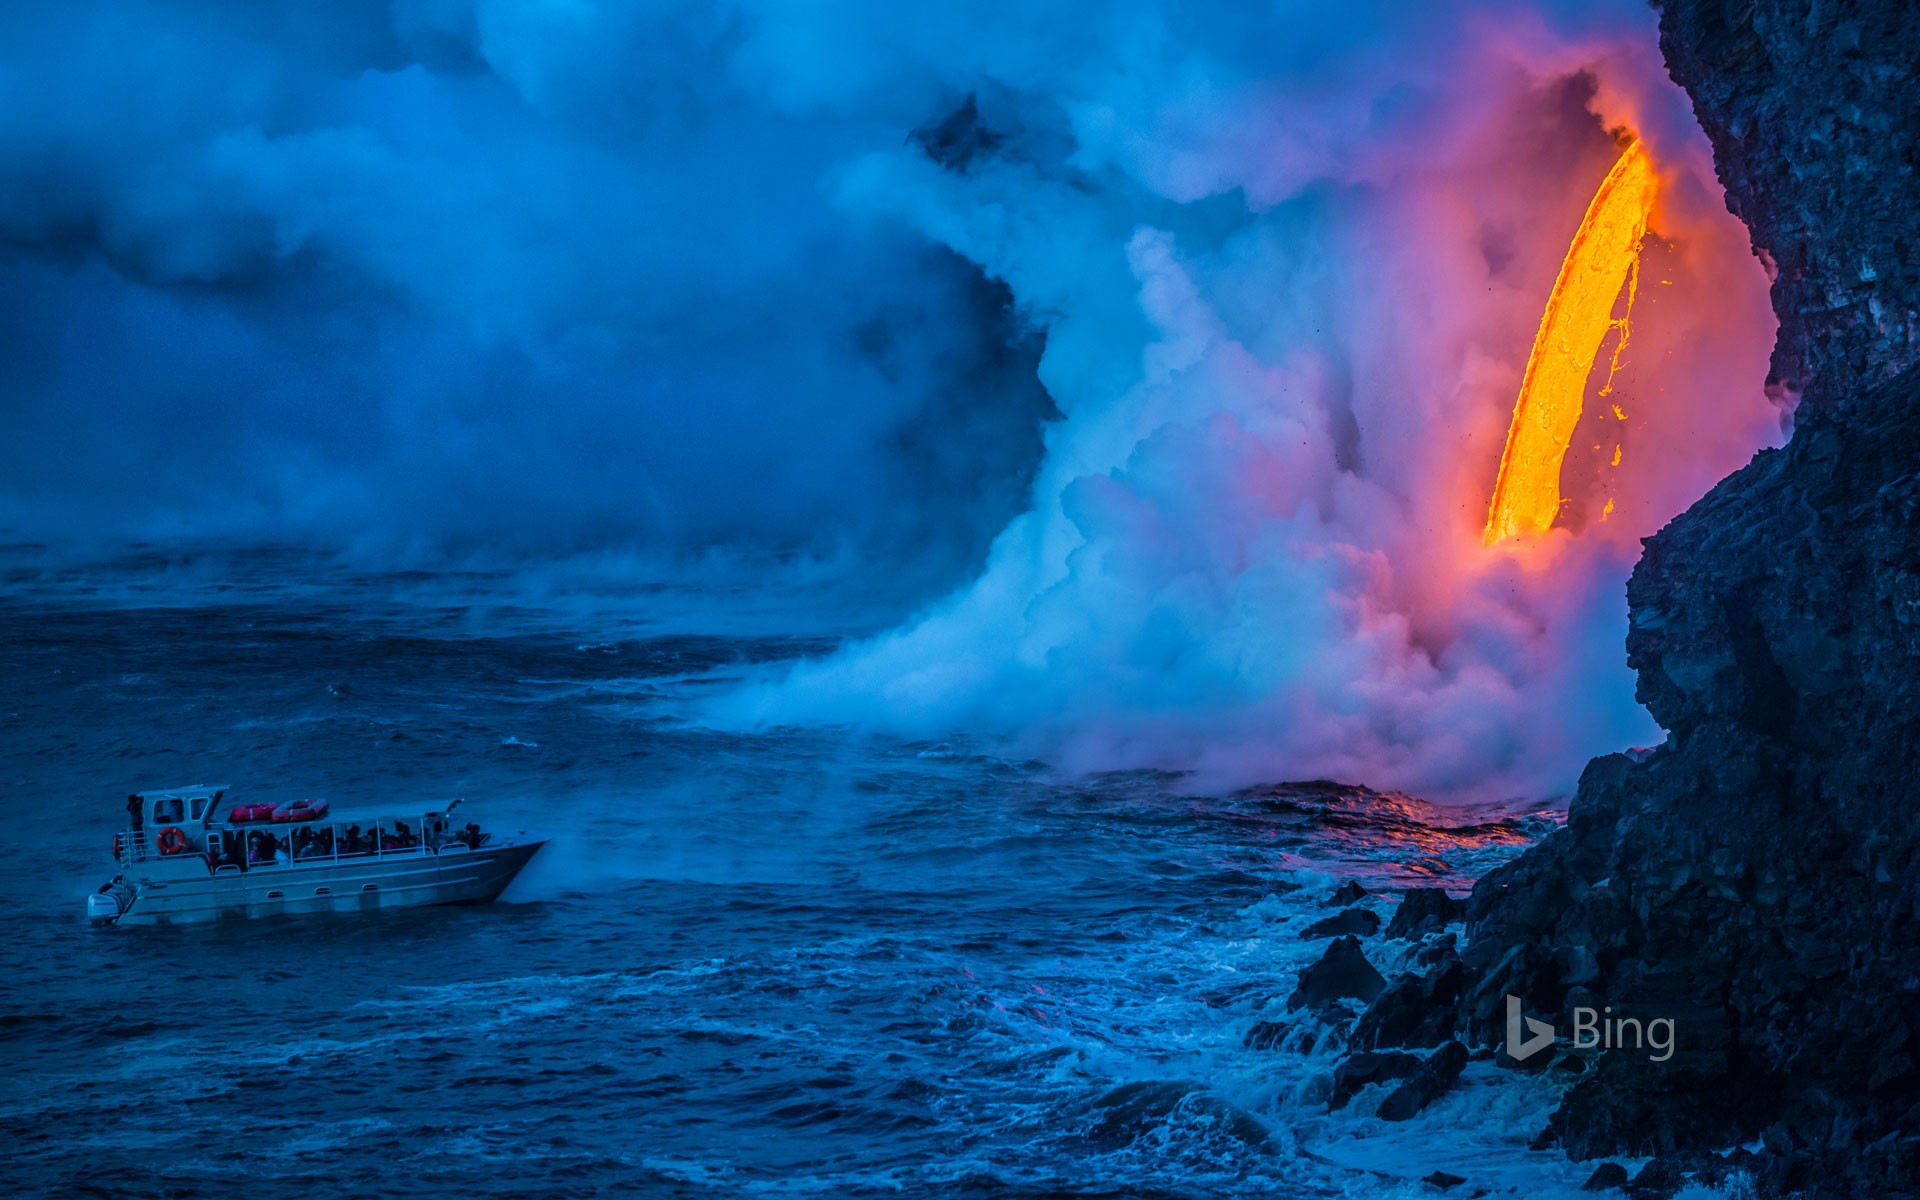 A lava flow hits water to create an explosion as a tourist boat passes, Hawaii Volcanoes National Park, USA